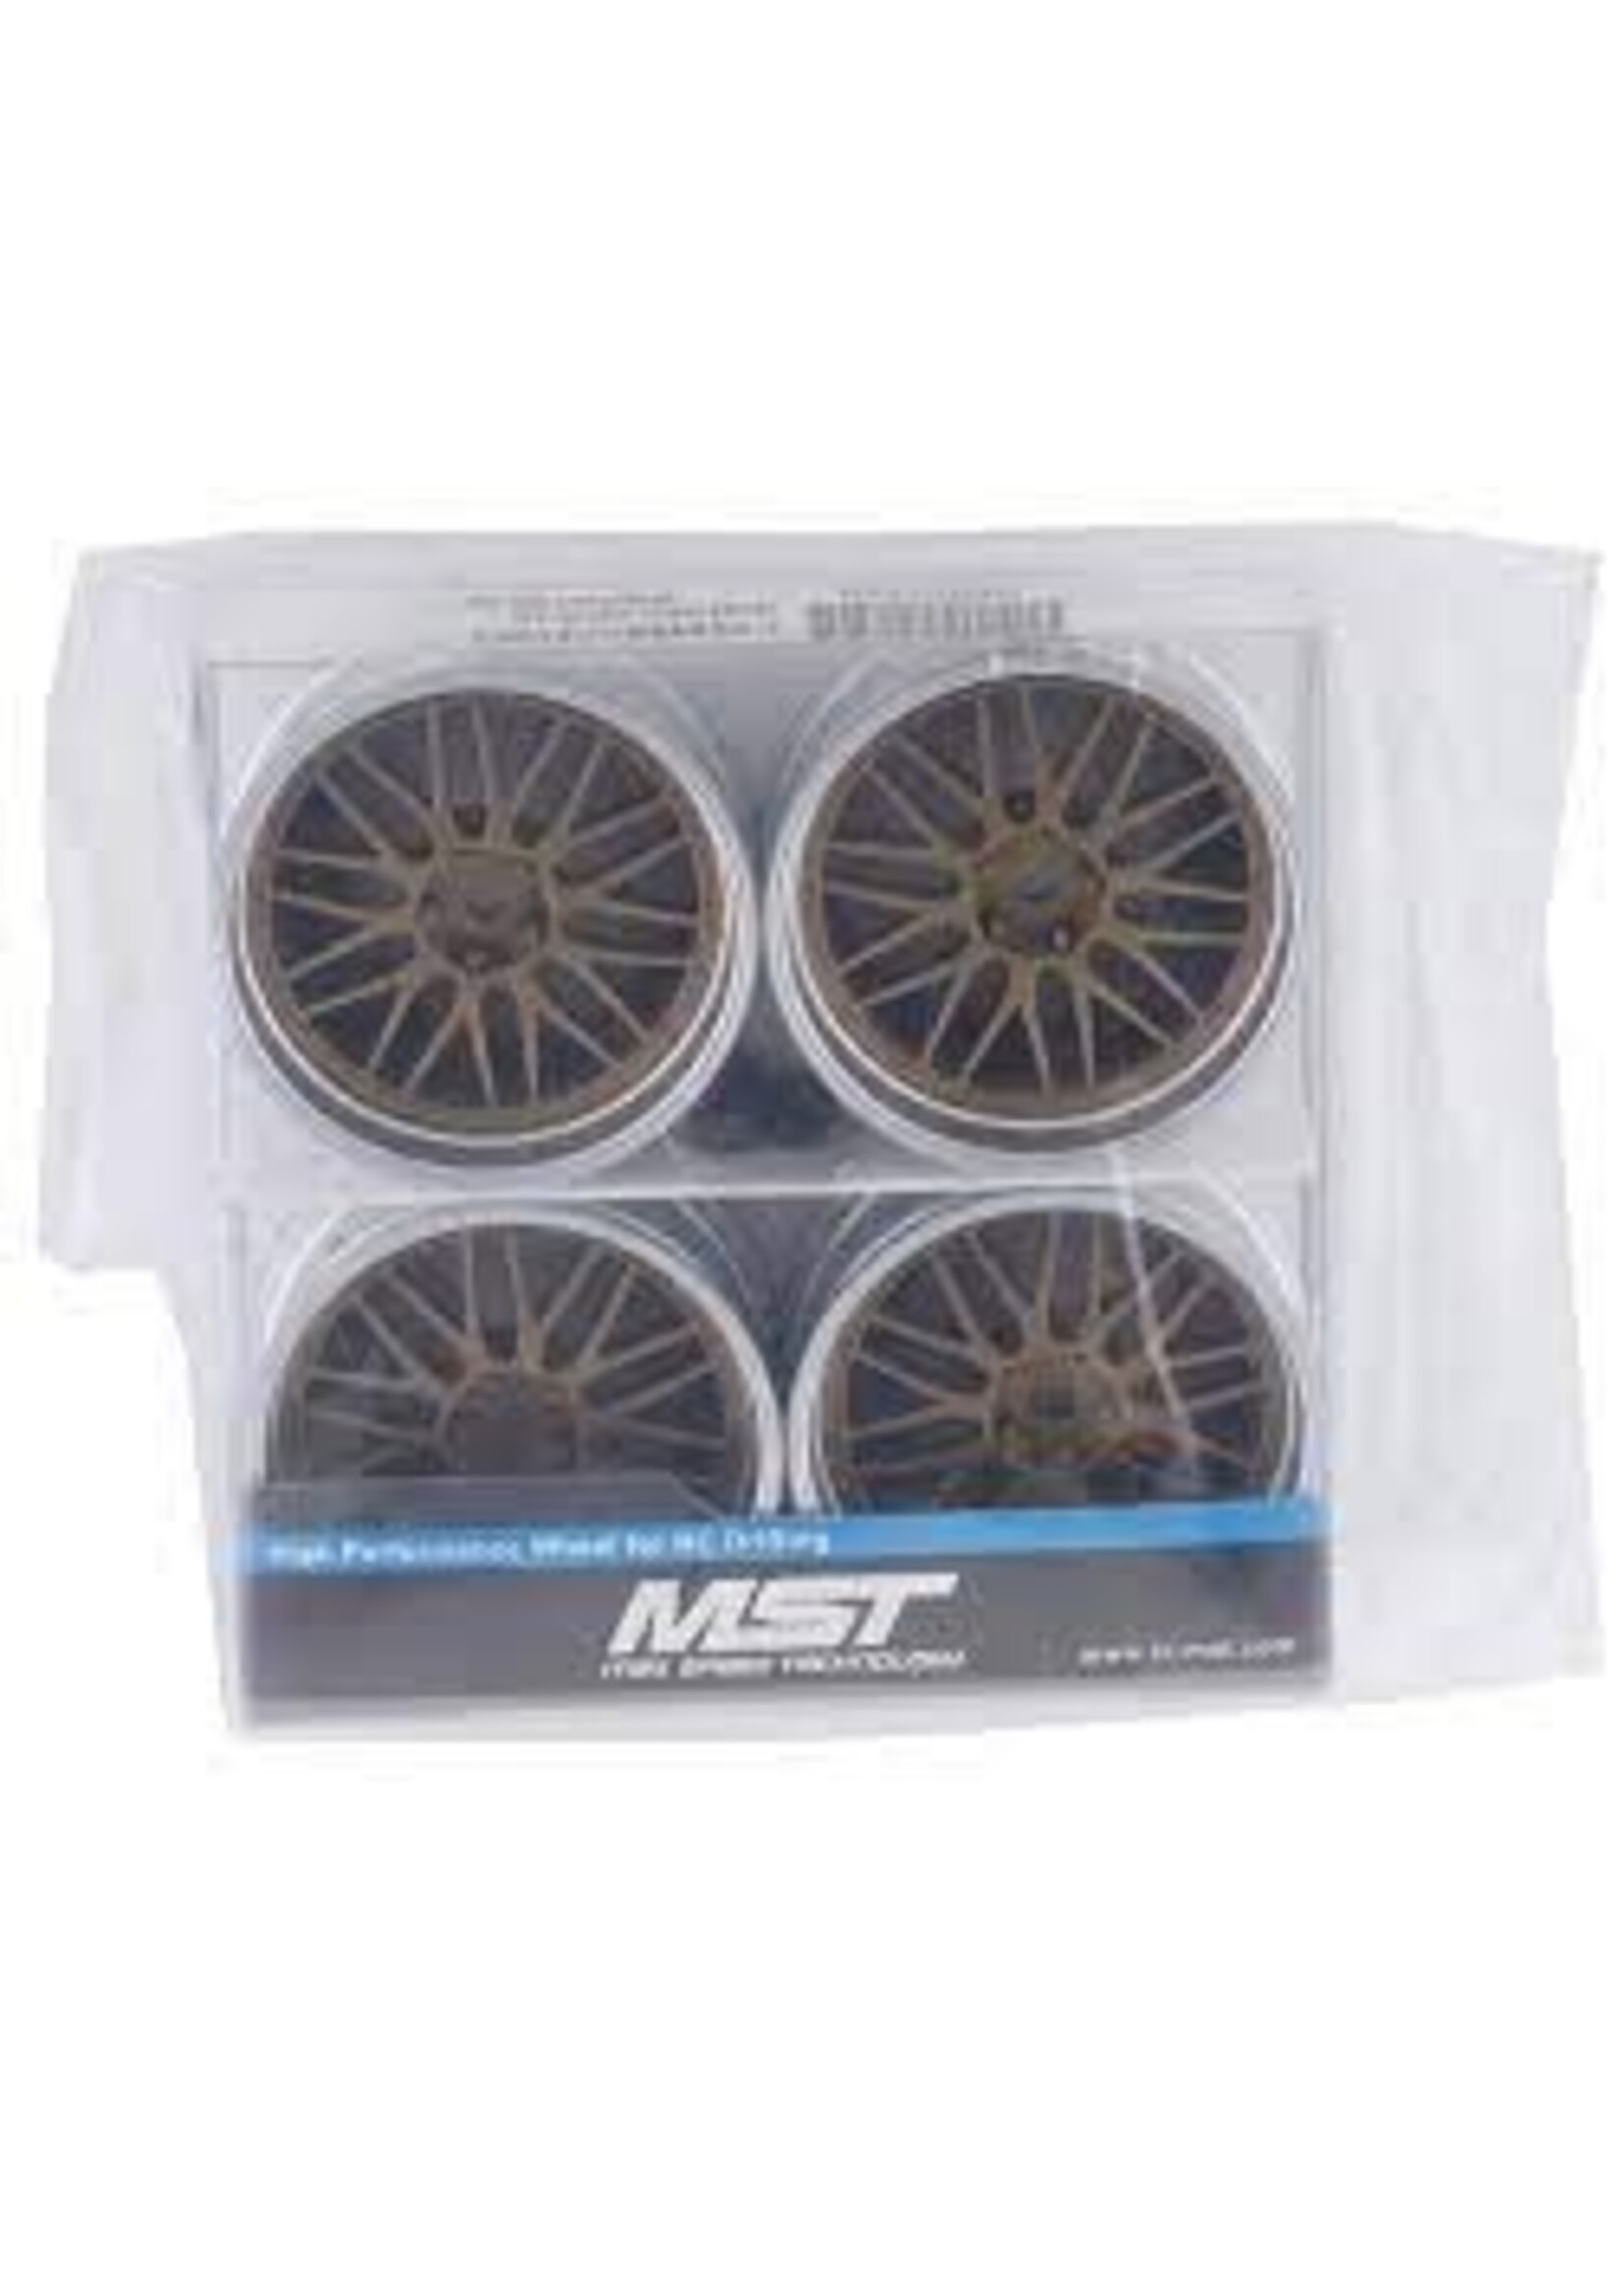 MST MXS-832101GD MST S-GD LM 21 Wheel Set (Gold) (4) (Offset Changeable) w/12mm Hex